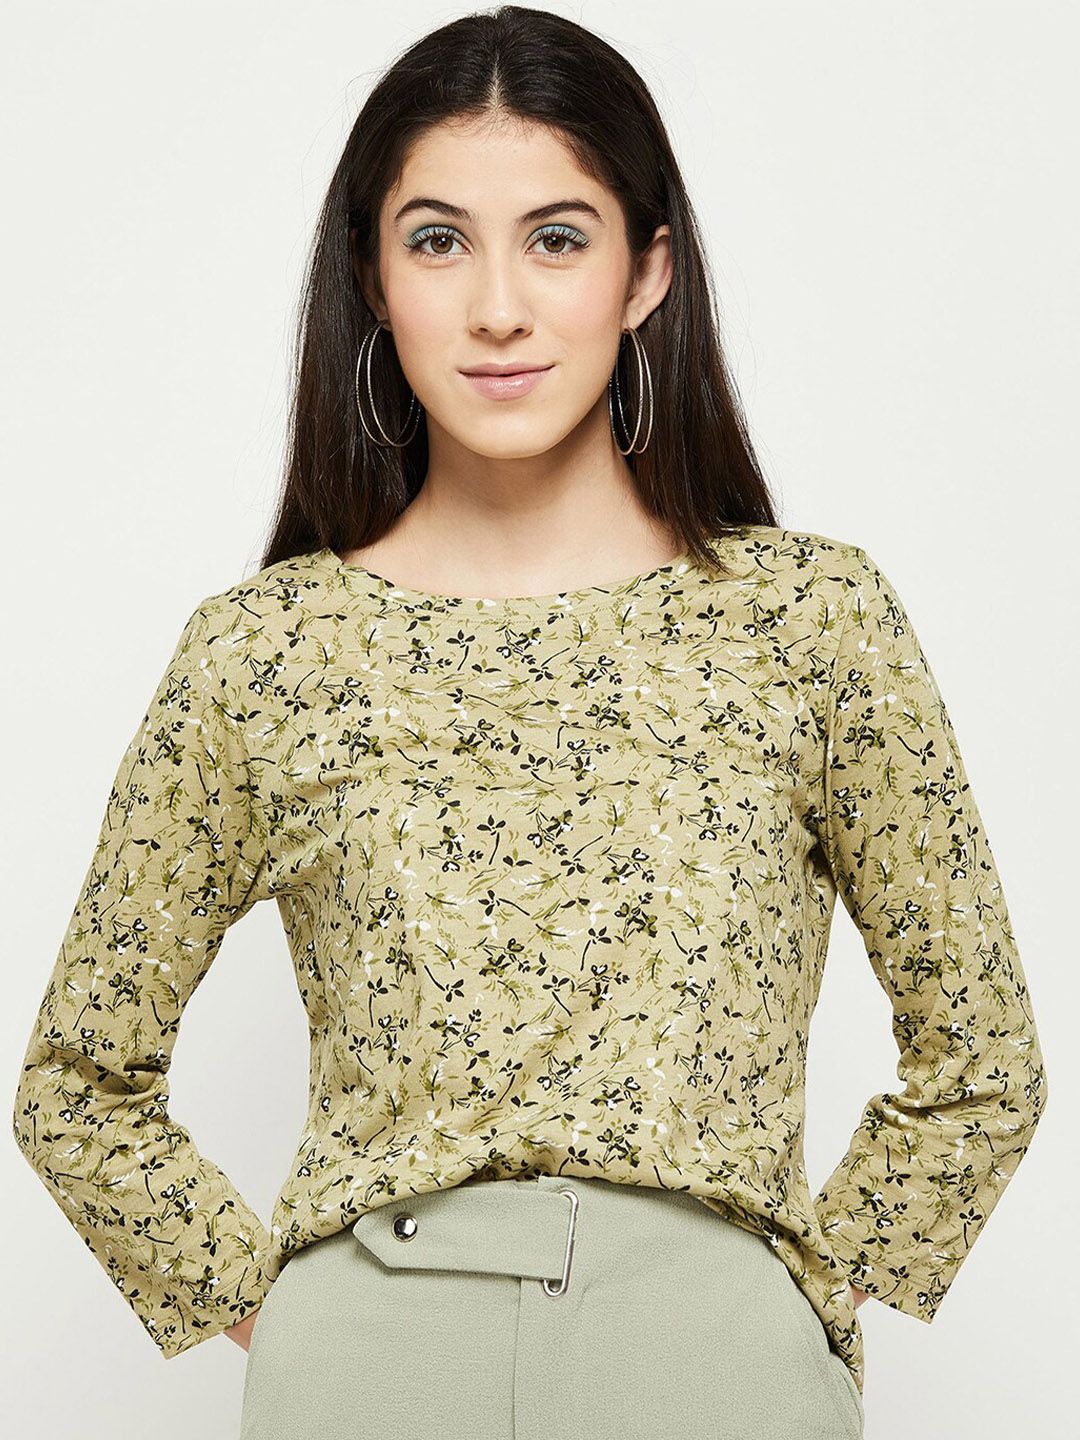 max Women Green Floral Print Top Price in India